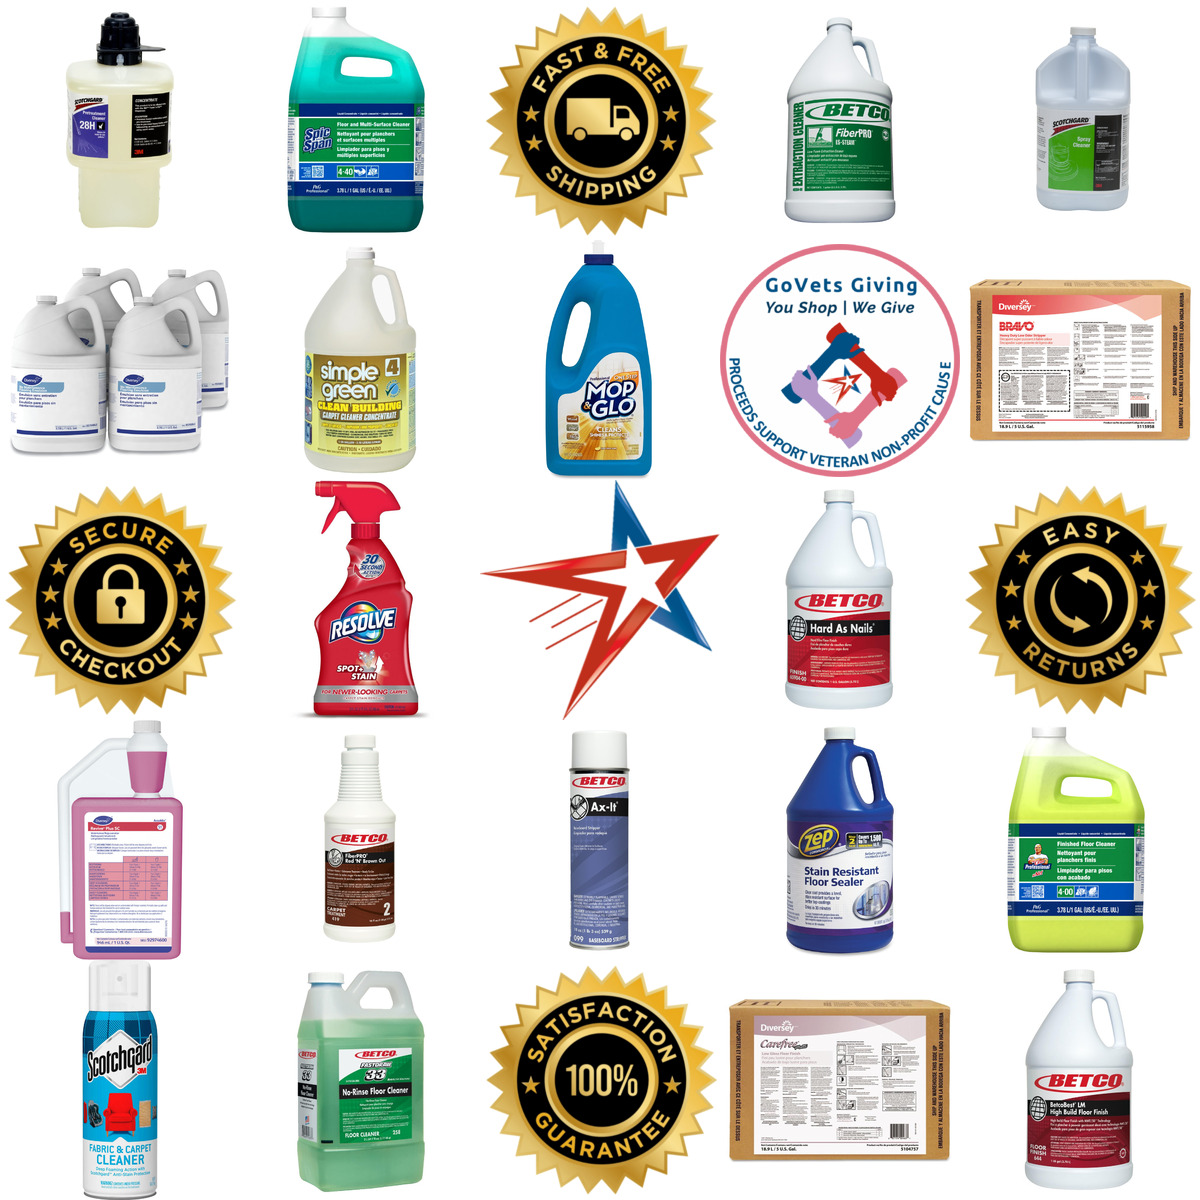 A selection of Floor Cleaners products on GoVets